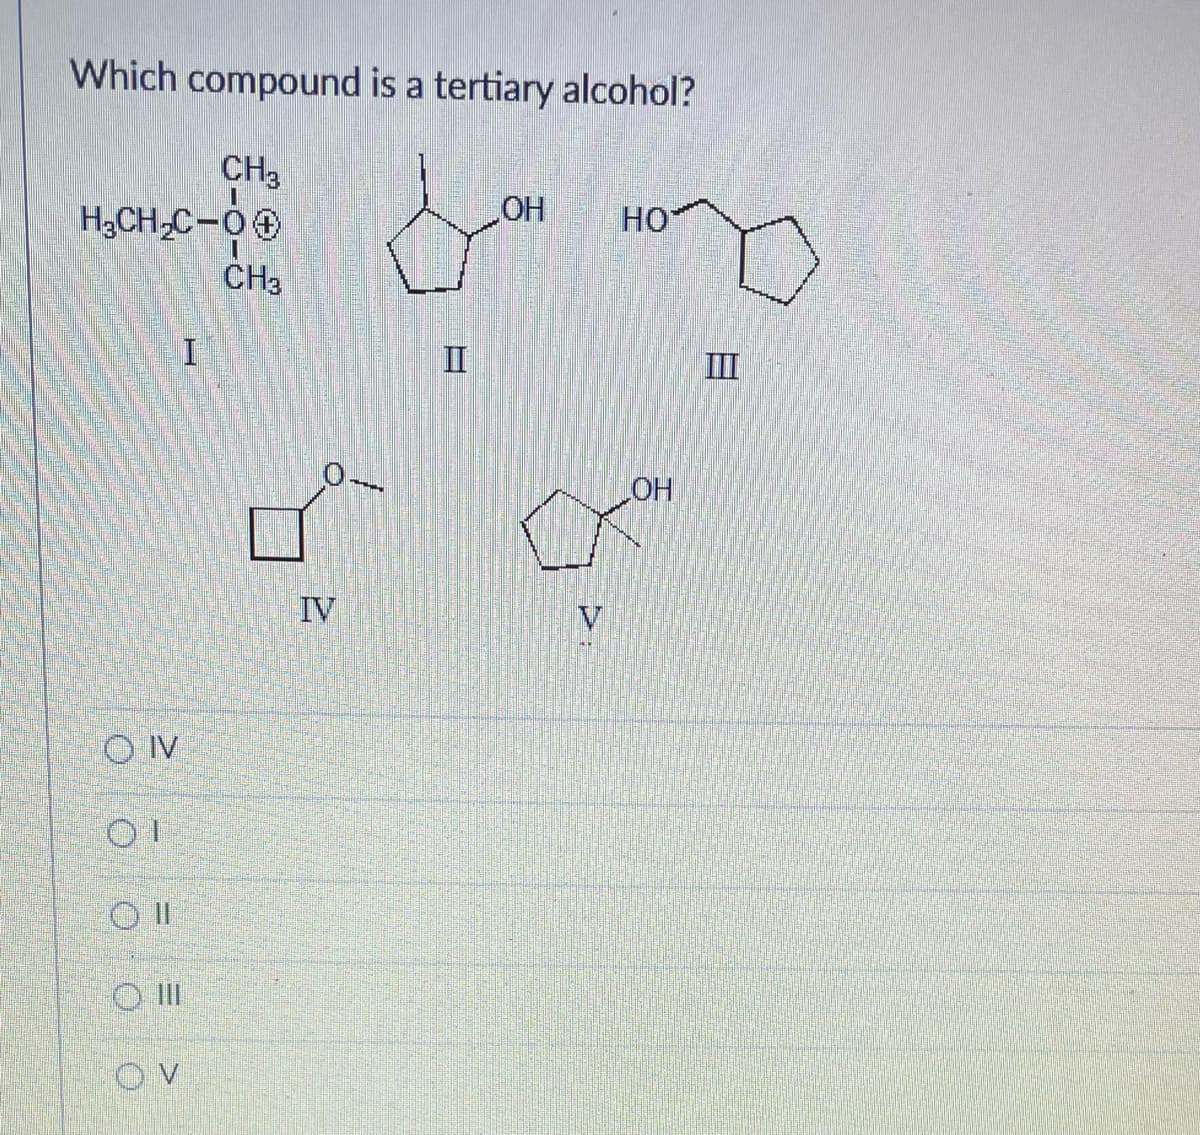 Which compound is a tertiary alcohol?
CH3
H₂CH₂C-00
OIV
01
>
I
CH3
IV
OH
V
HO
LOH
8